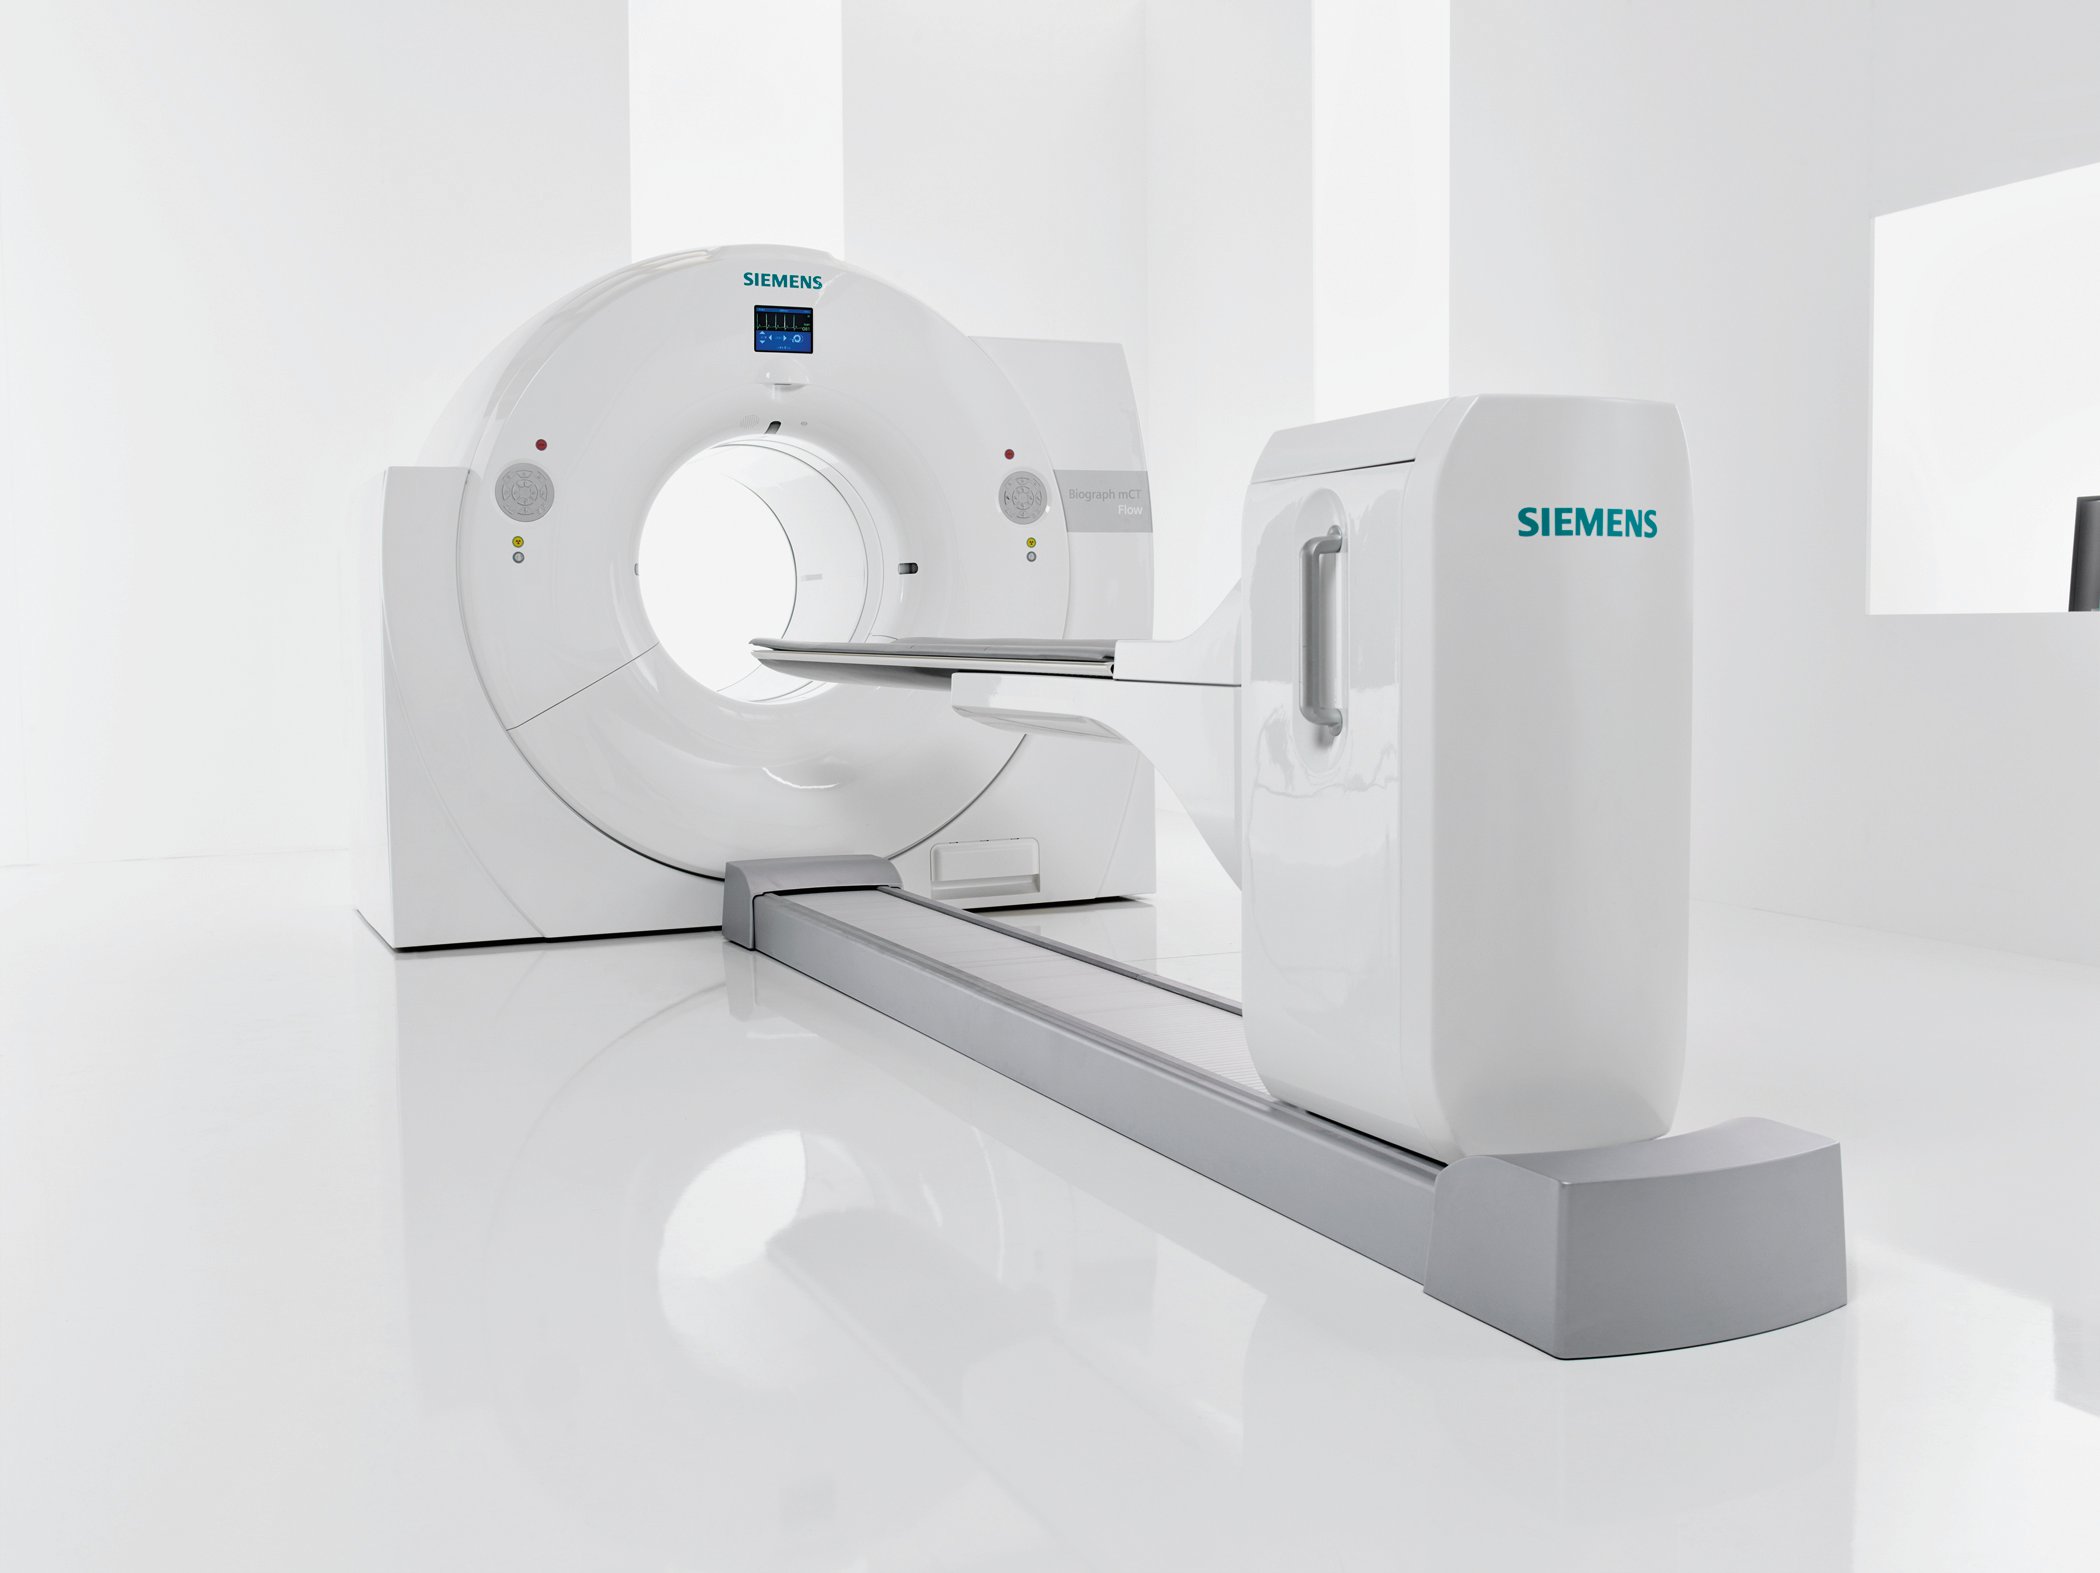 Improvements in PET/CT Systems